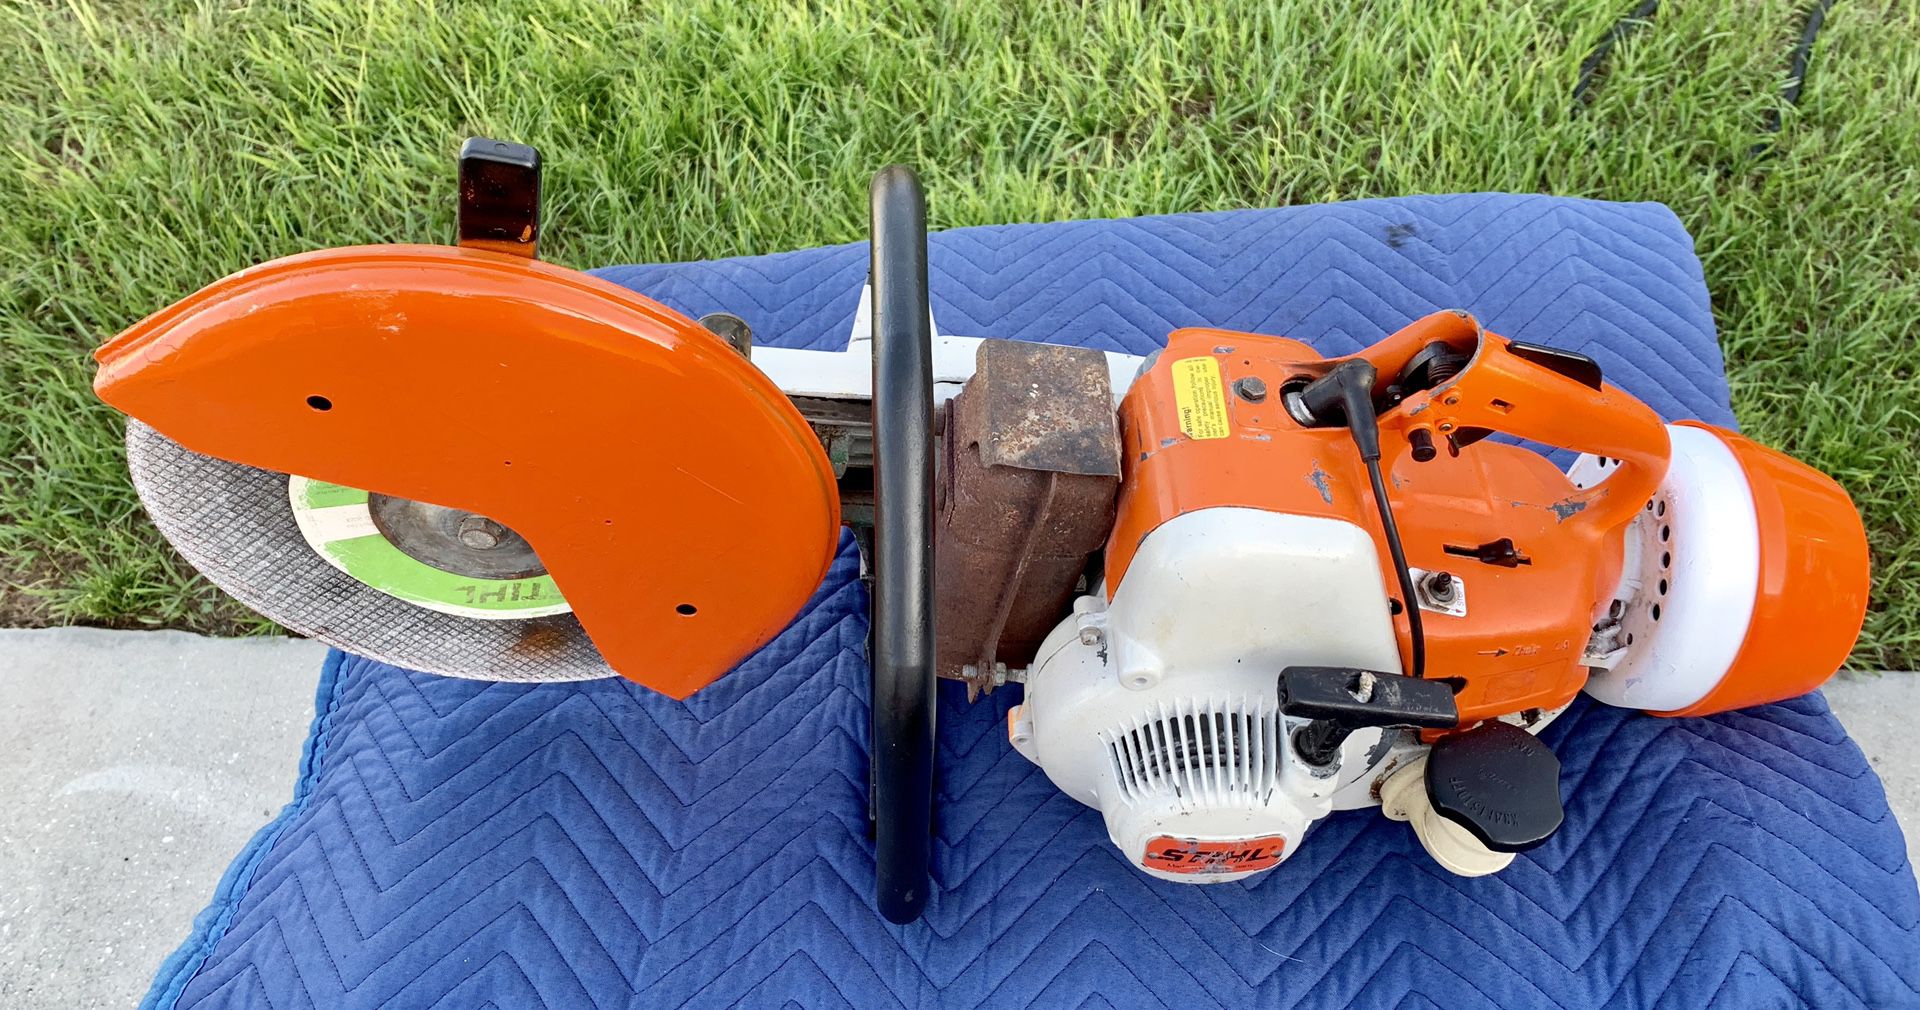 Stihl TS 350 Super Concrete Saw - Runs - NEW Air Cleaner Assembly - Sometimes It Will Stall